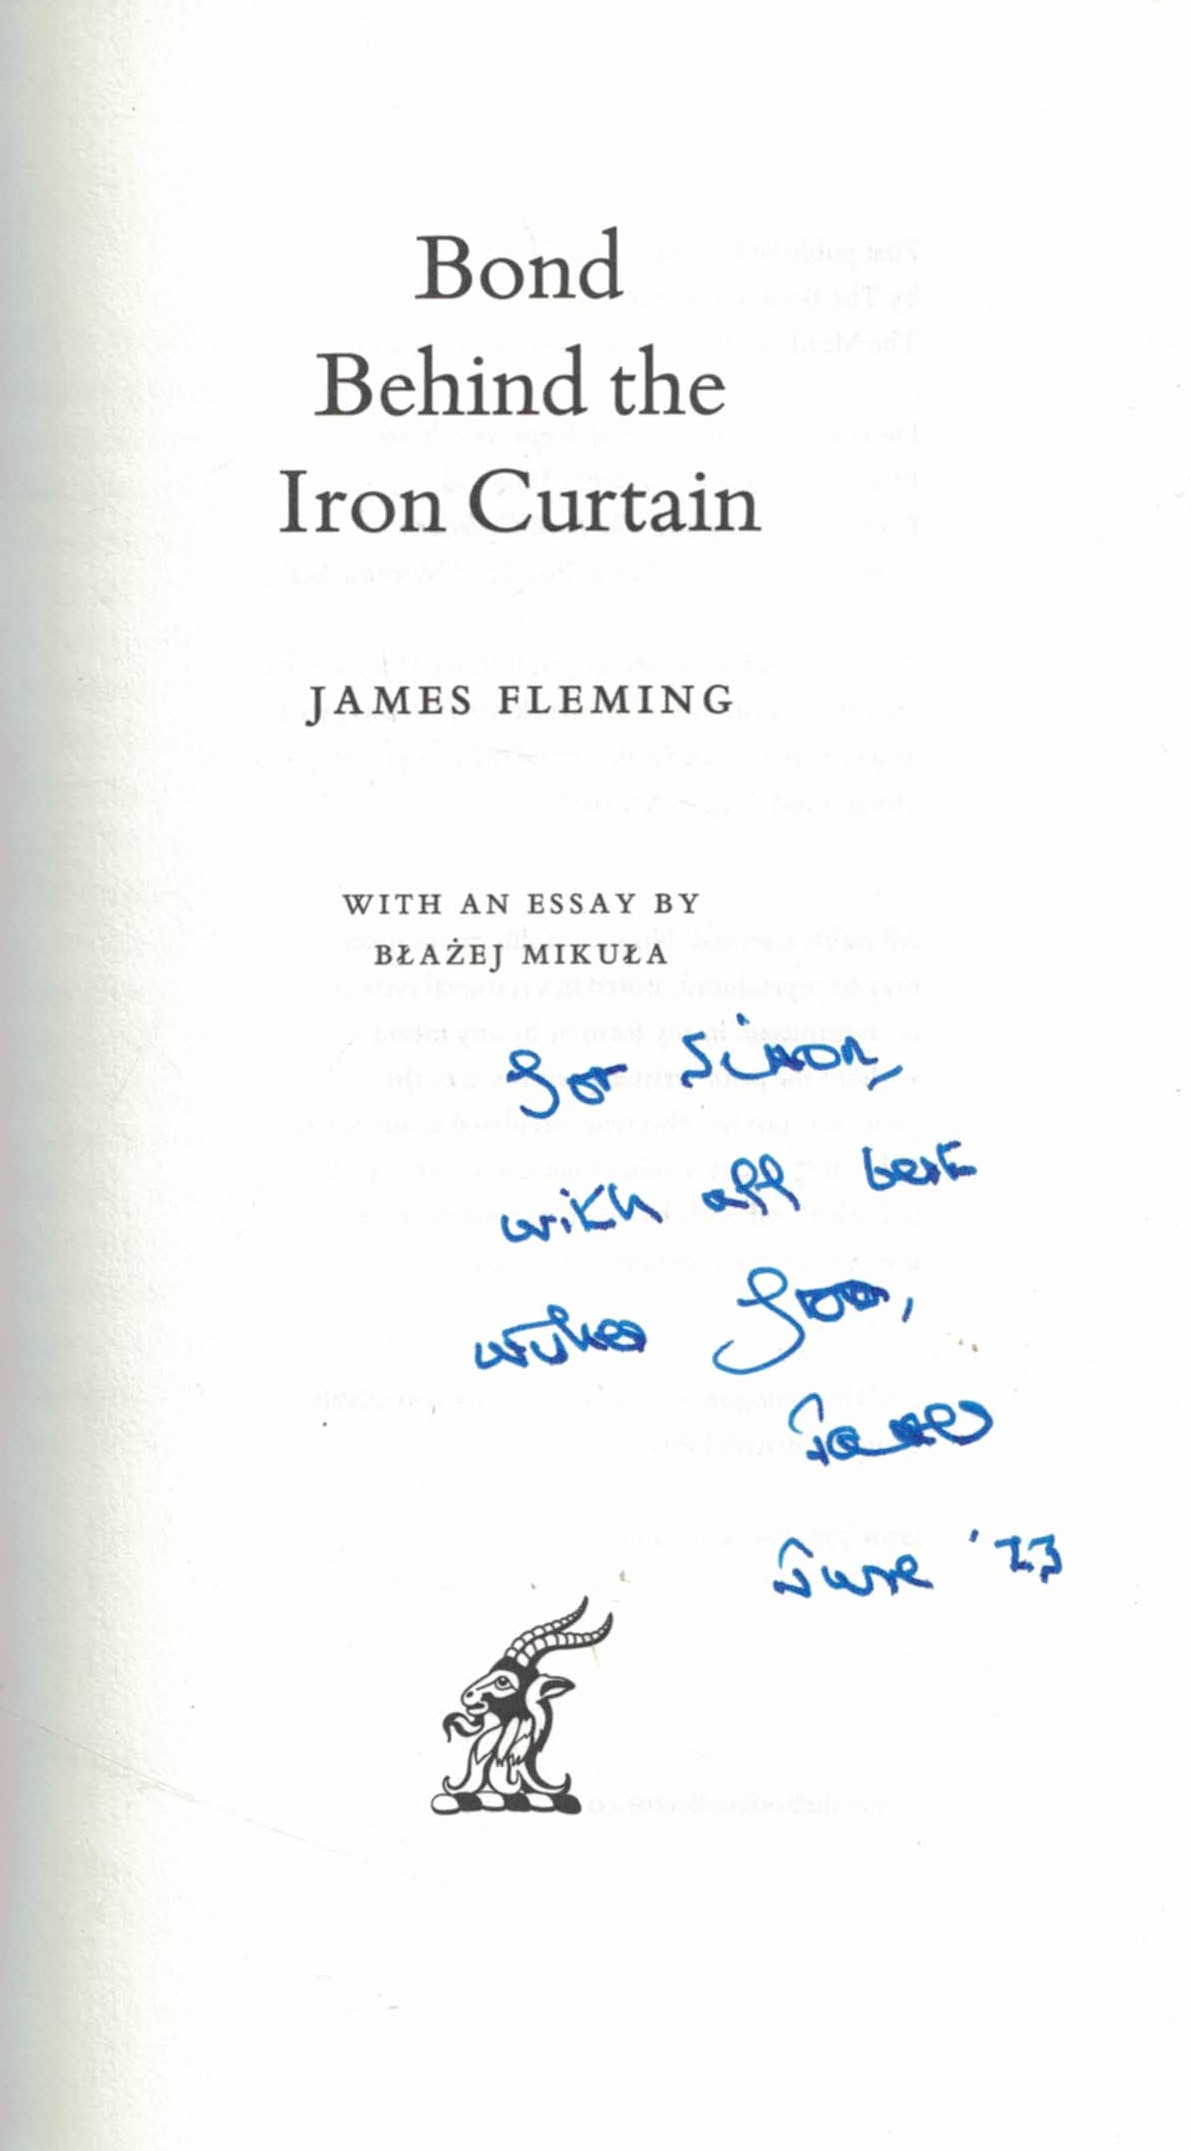 Bond Behind the Iron Curtain. Signed copy.